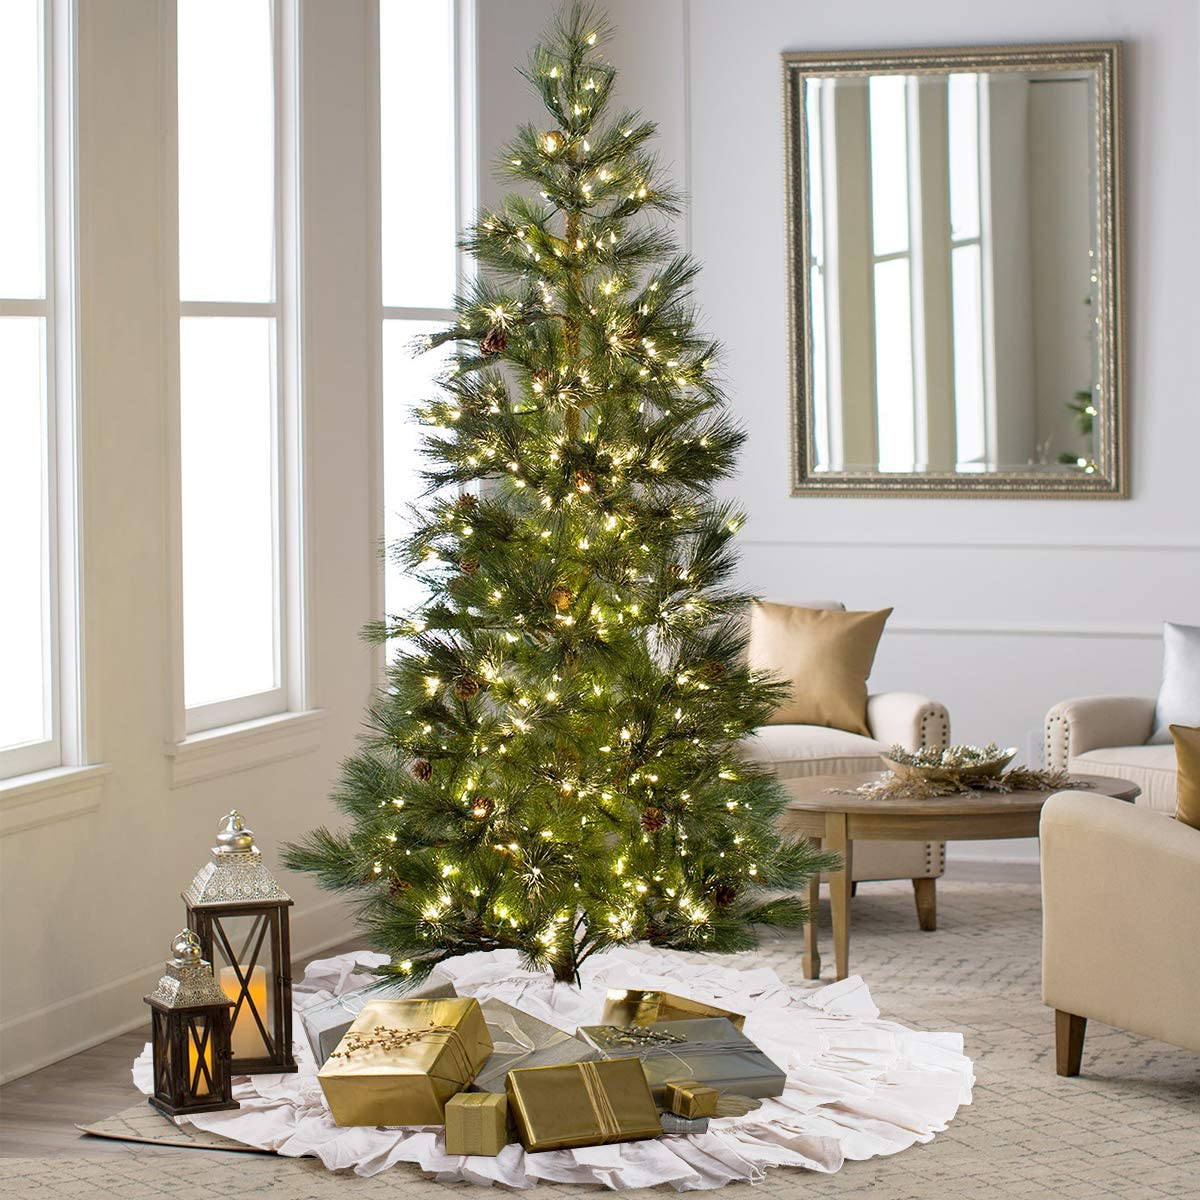 Our Hopeful Home: Best Christmas Tree Collars, Skirts, Stands And More